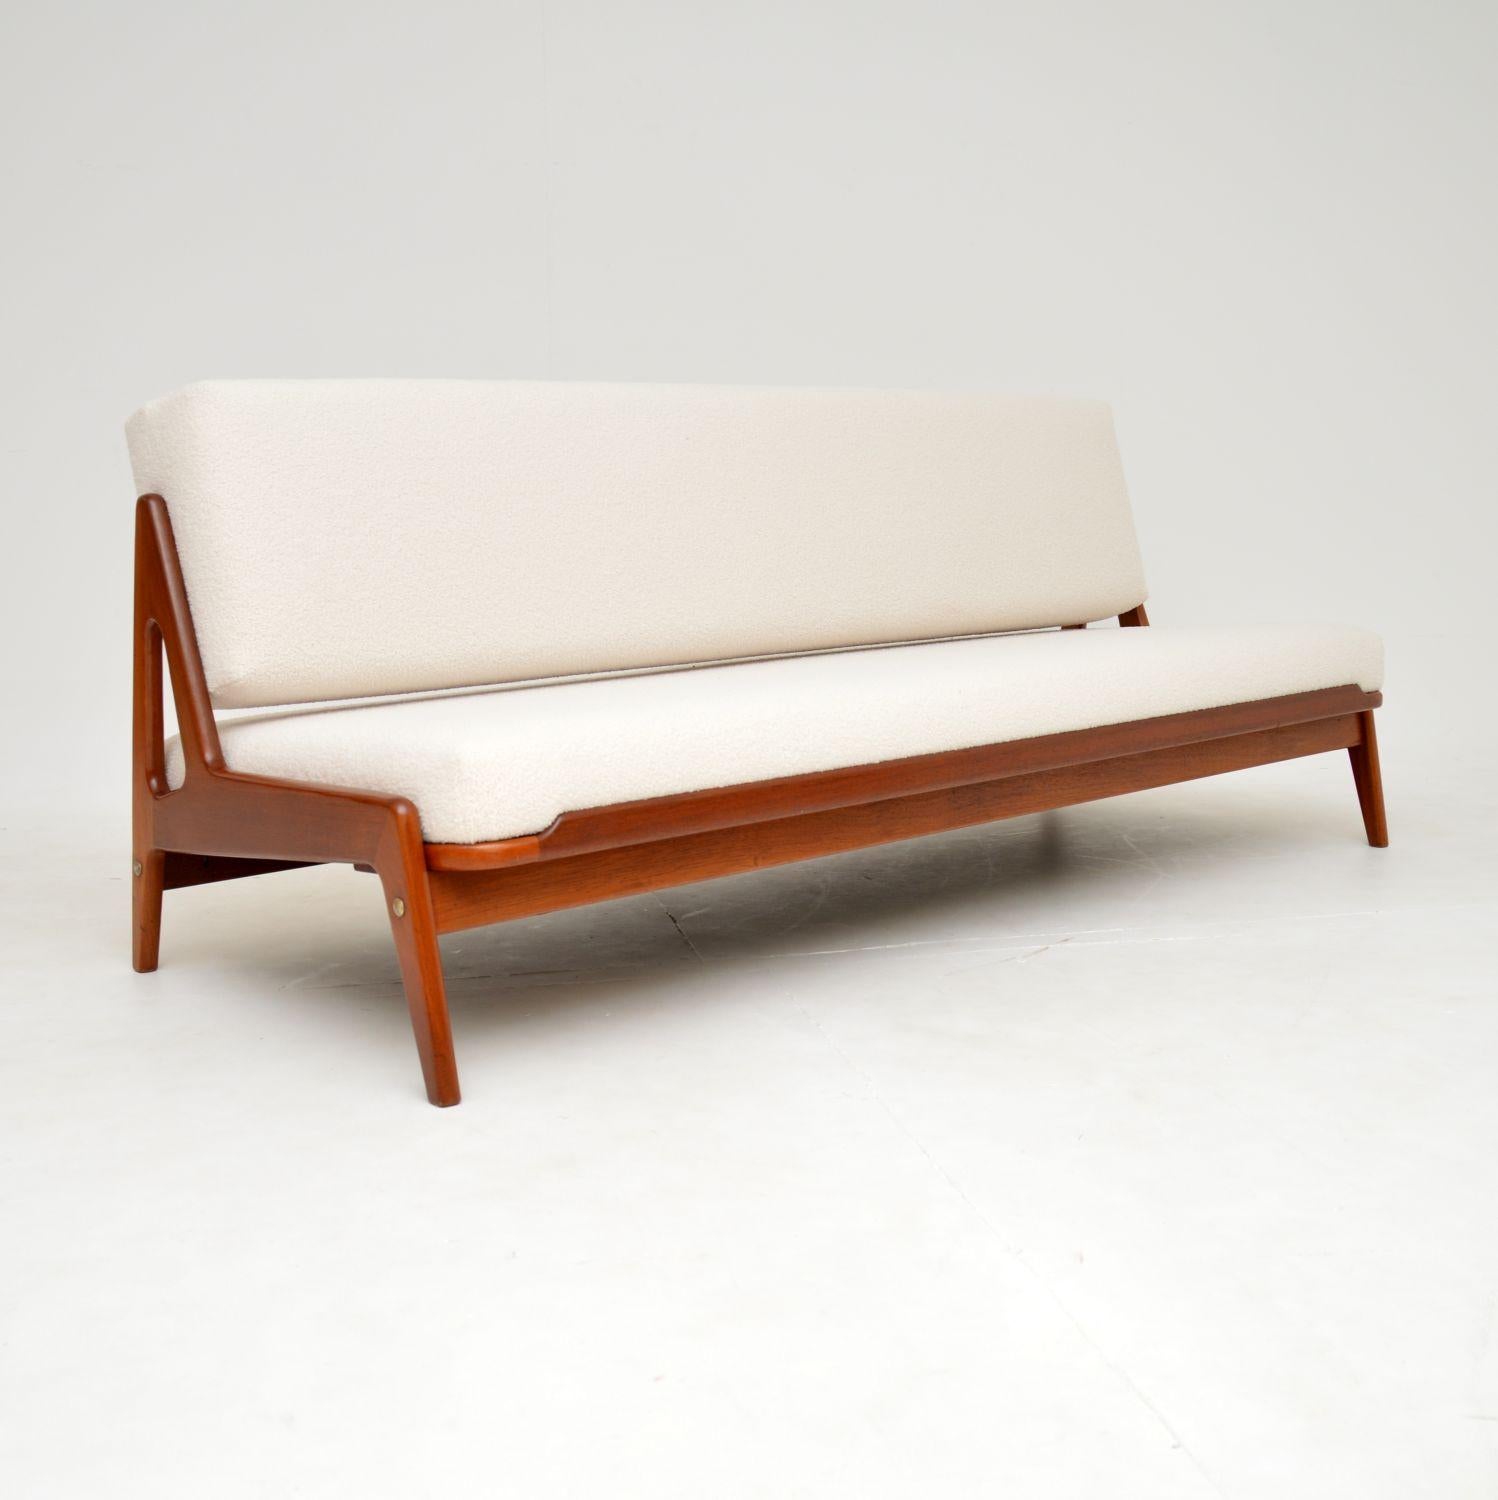 A beautiful and very rare vintage Danish sofa bed in teak. This was made in Denmark by Komfort, it was designed by Arne Wahl Iversen and dates from the 1960-70’s.

The quality is fantastic, this has a very stylish and clever design. The seat pulls